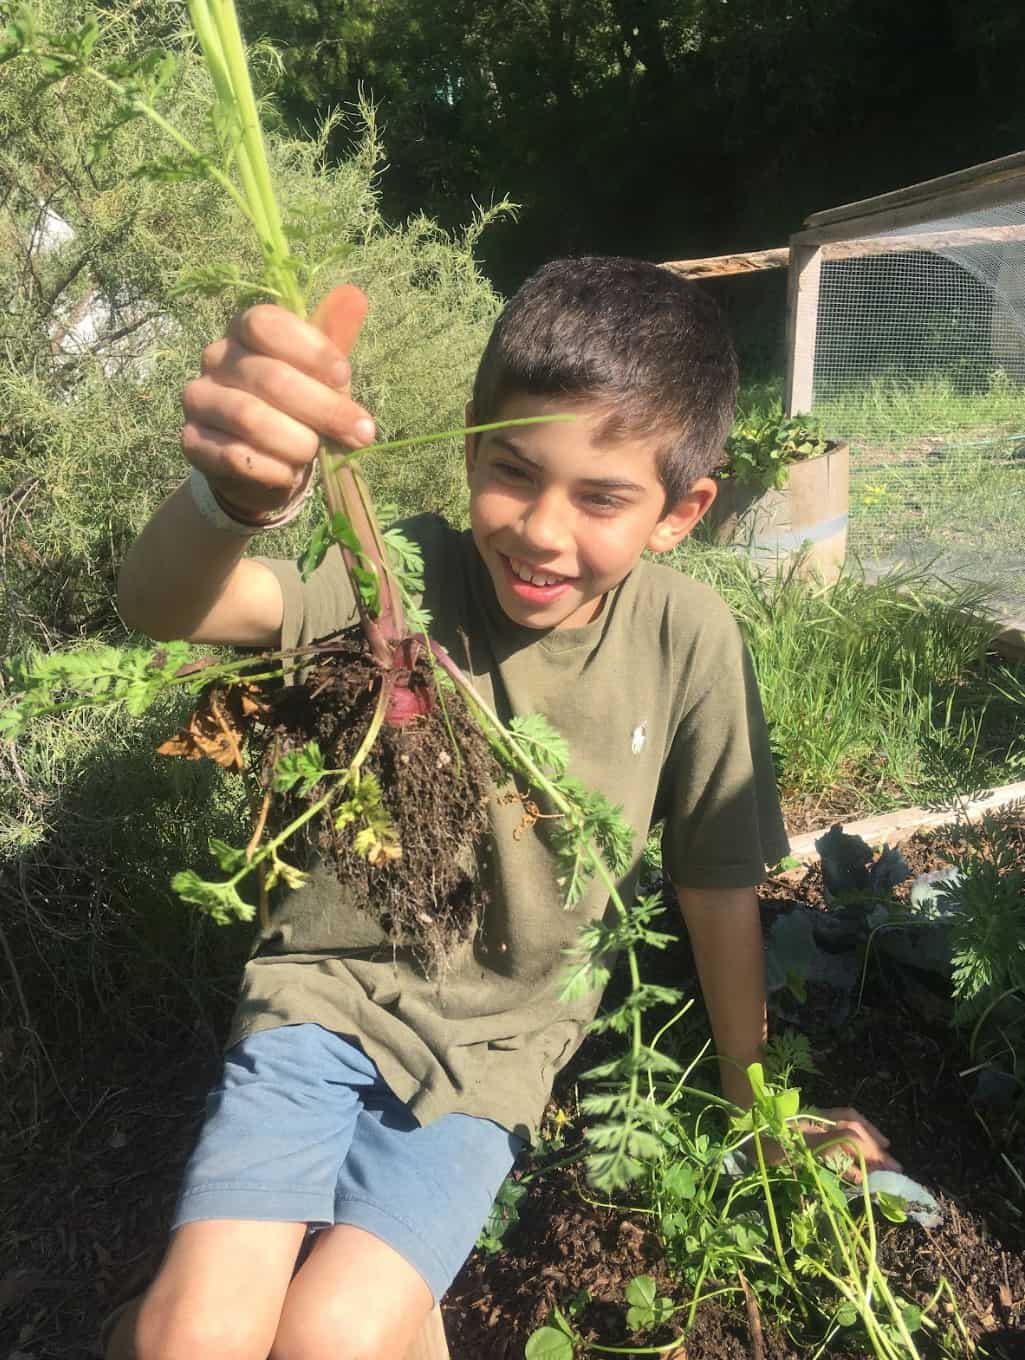 Earthroots student with local garden vegetables